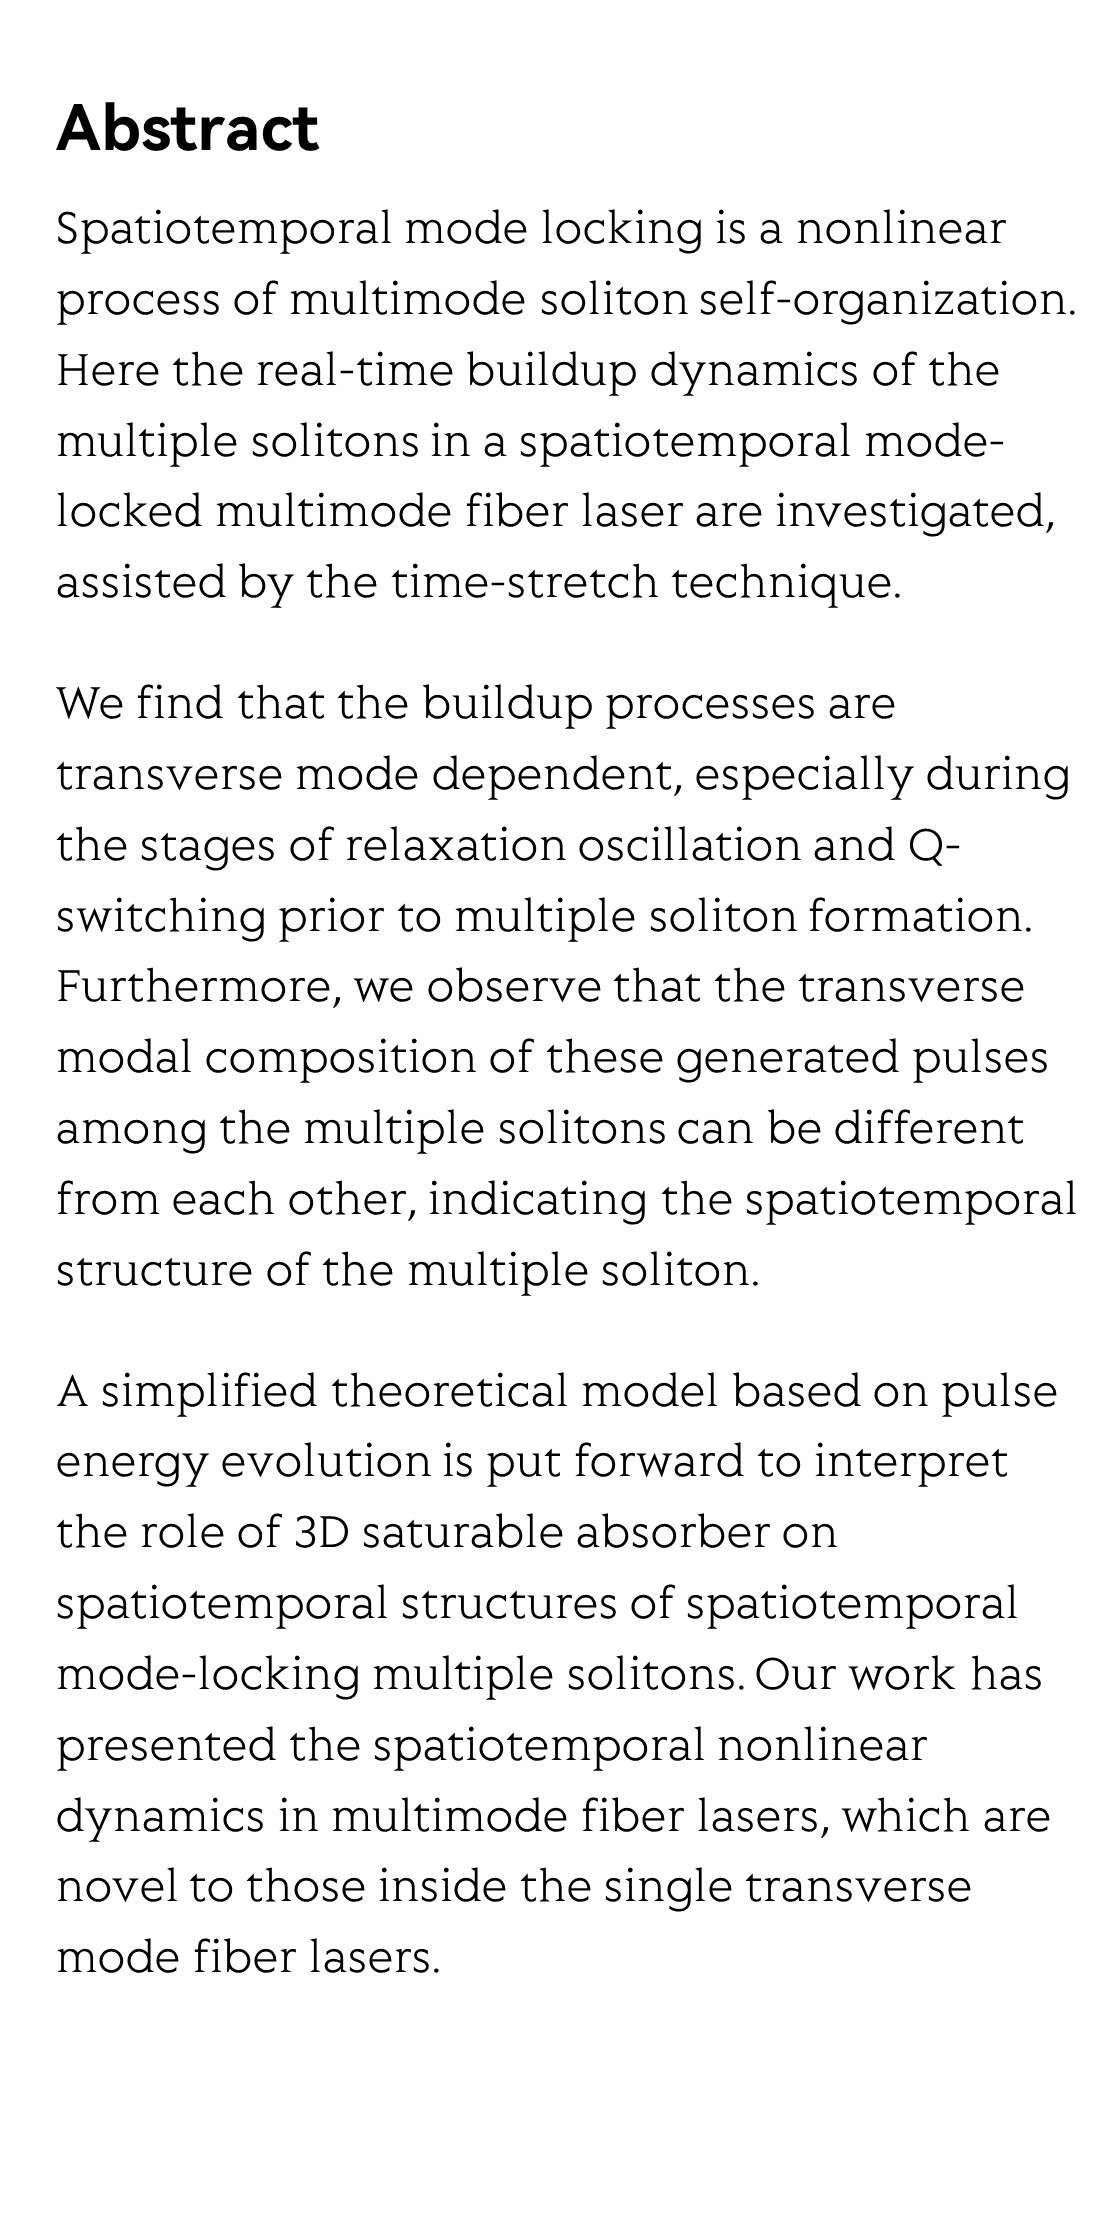 Buildup dynamics of multiple solitons in spatiotemporal mode-locked fiber lasers_2